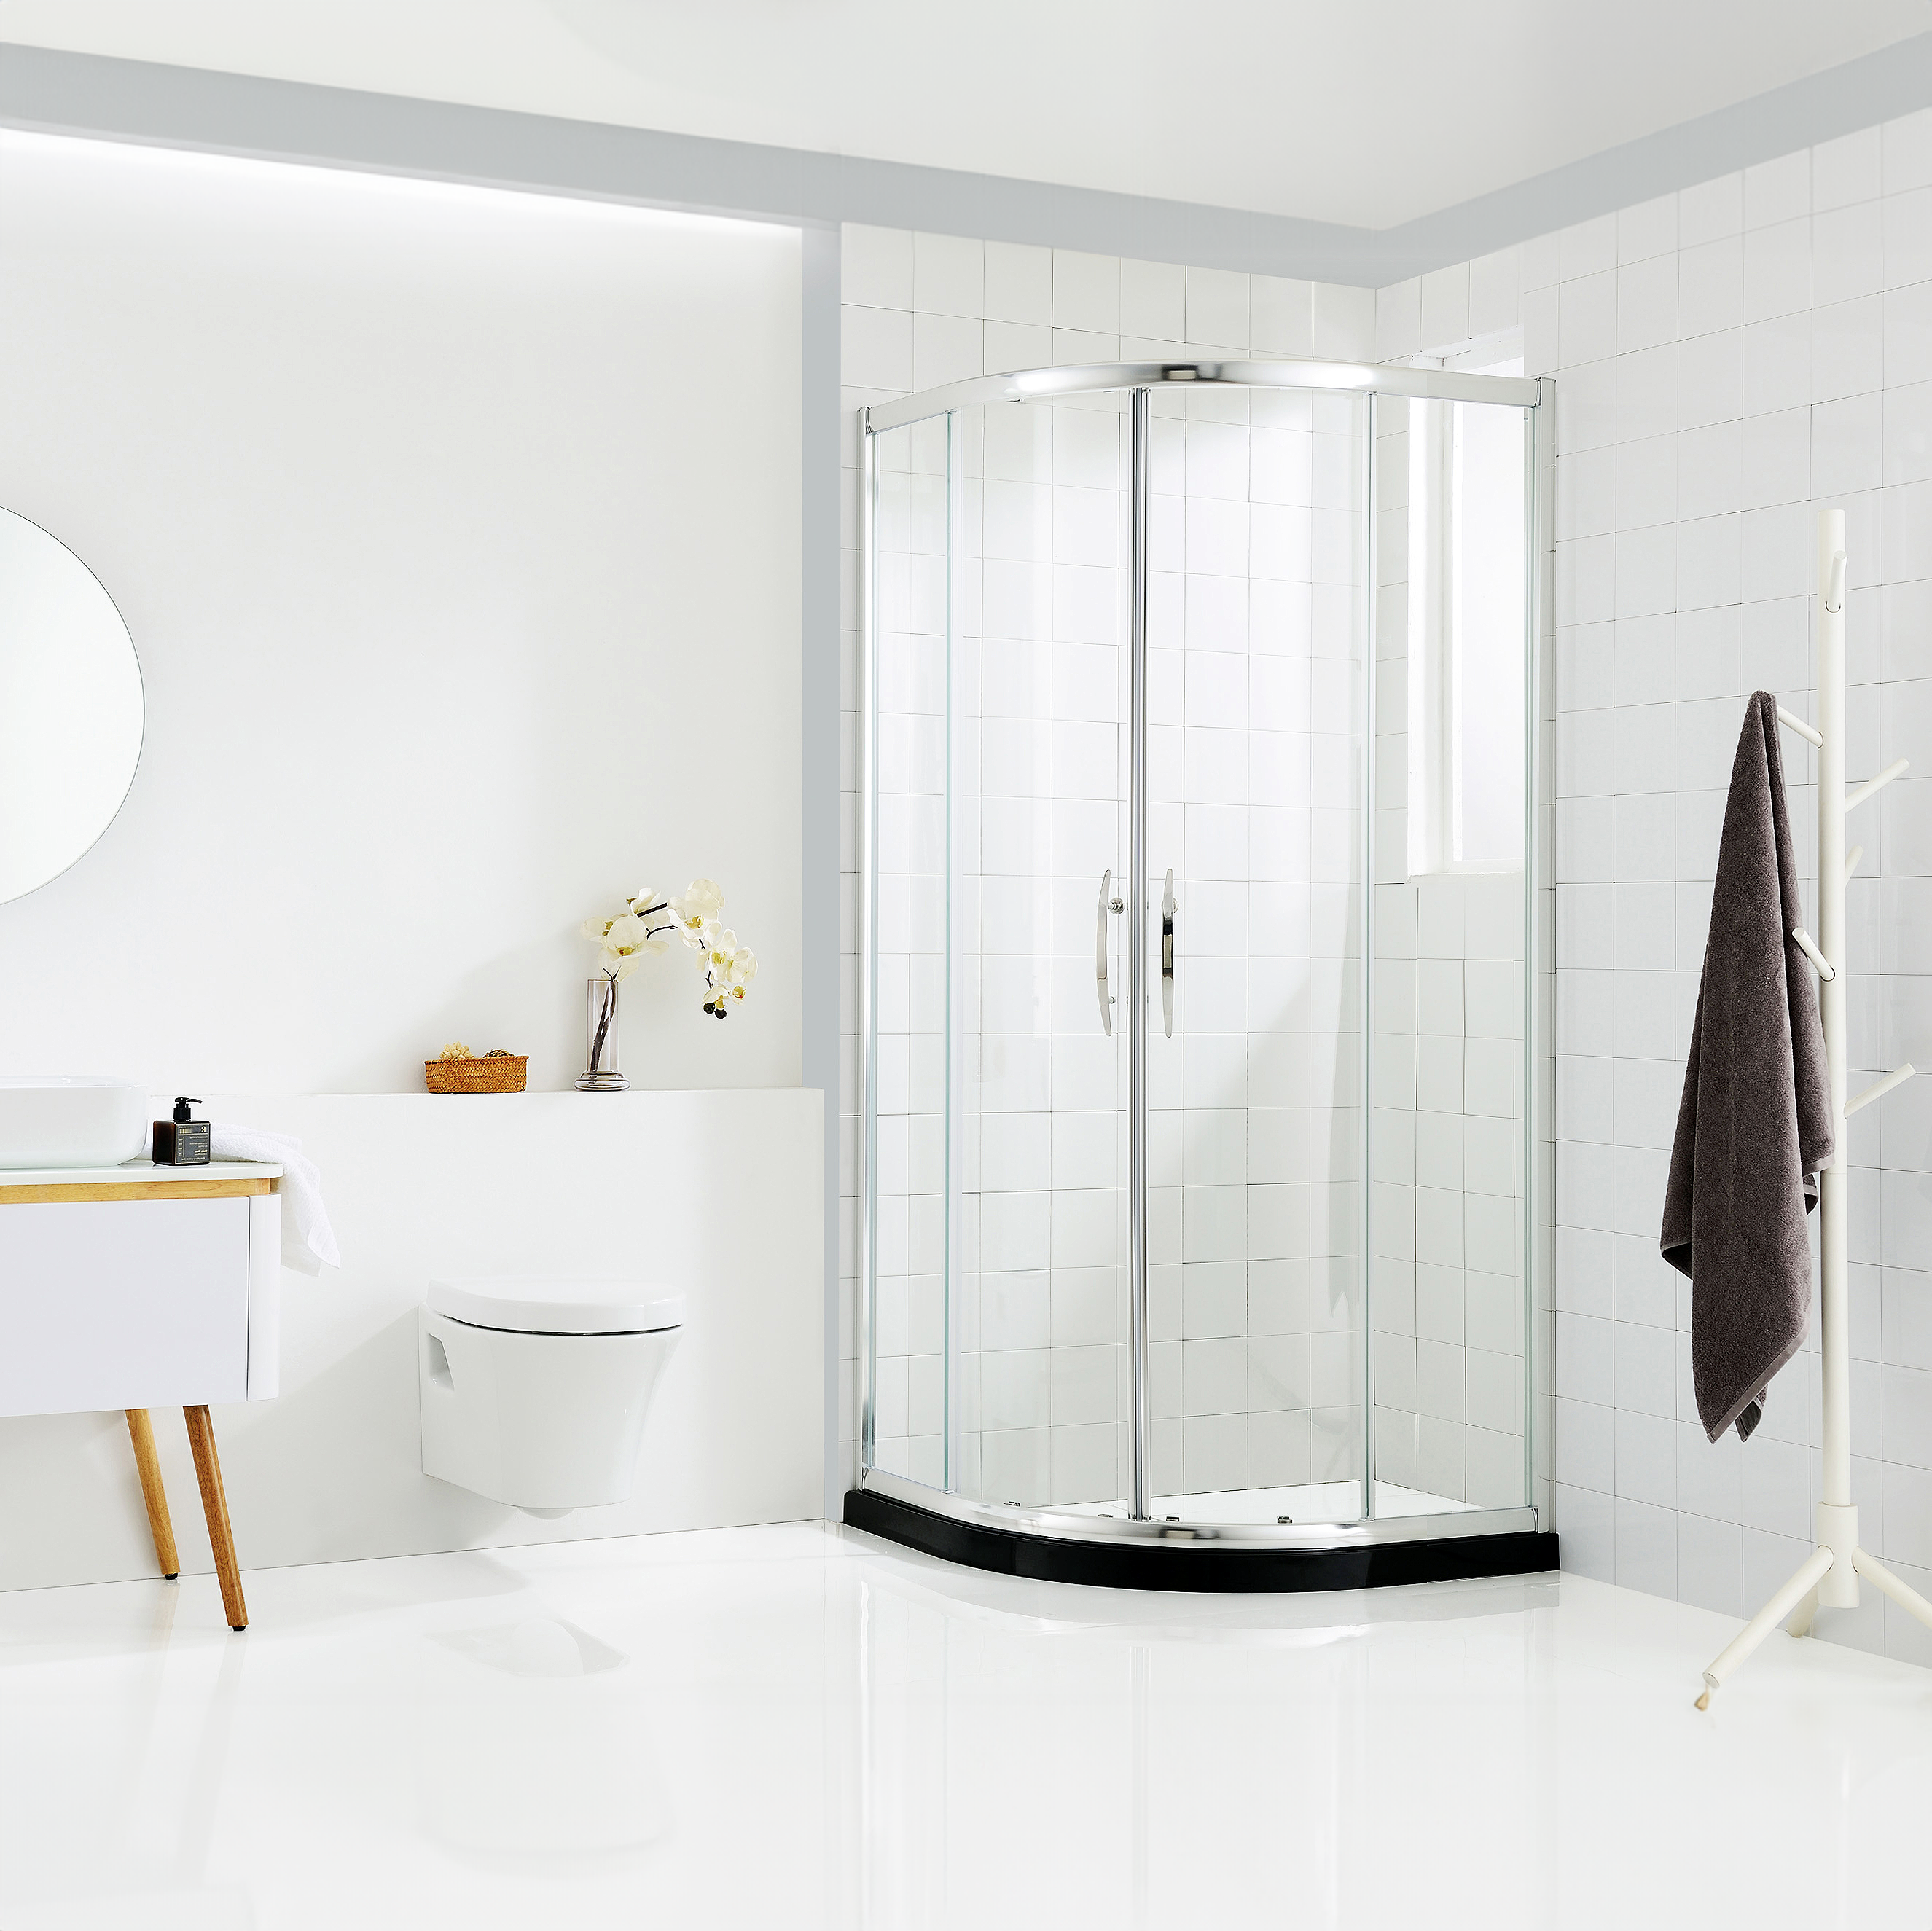 Dreamwerks 40"W x 79"H Framed Sliding Shower Enclosure - Available in Clear or Frosted Glass